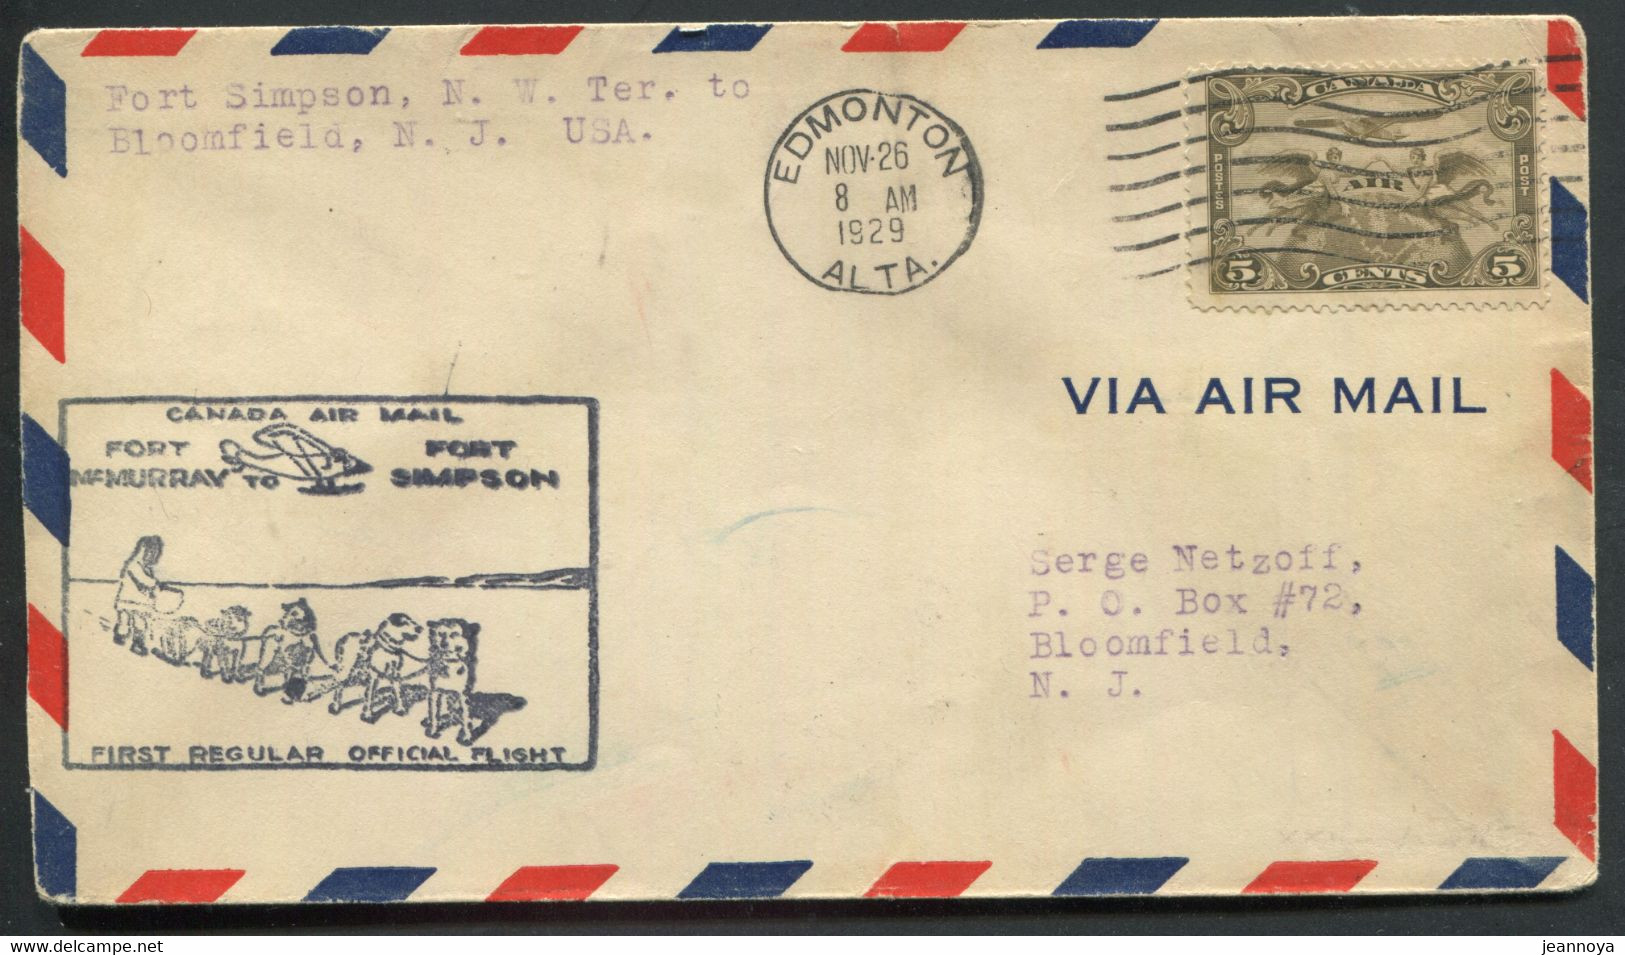 CANADA -  PA N° 1 / 1er. VOL Ft. MAC MURRAY-FORT SIMPSON LE 26/11/1929 ( MULLER N° 168 ) - SUP - First Flight Covers